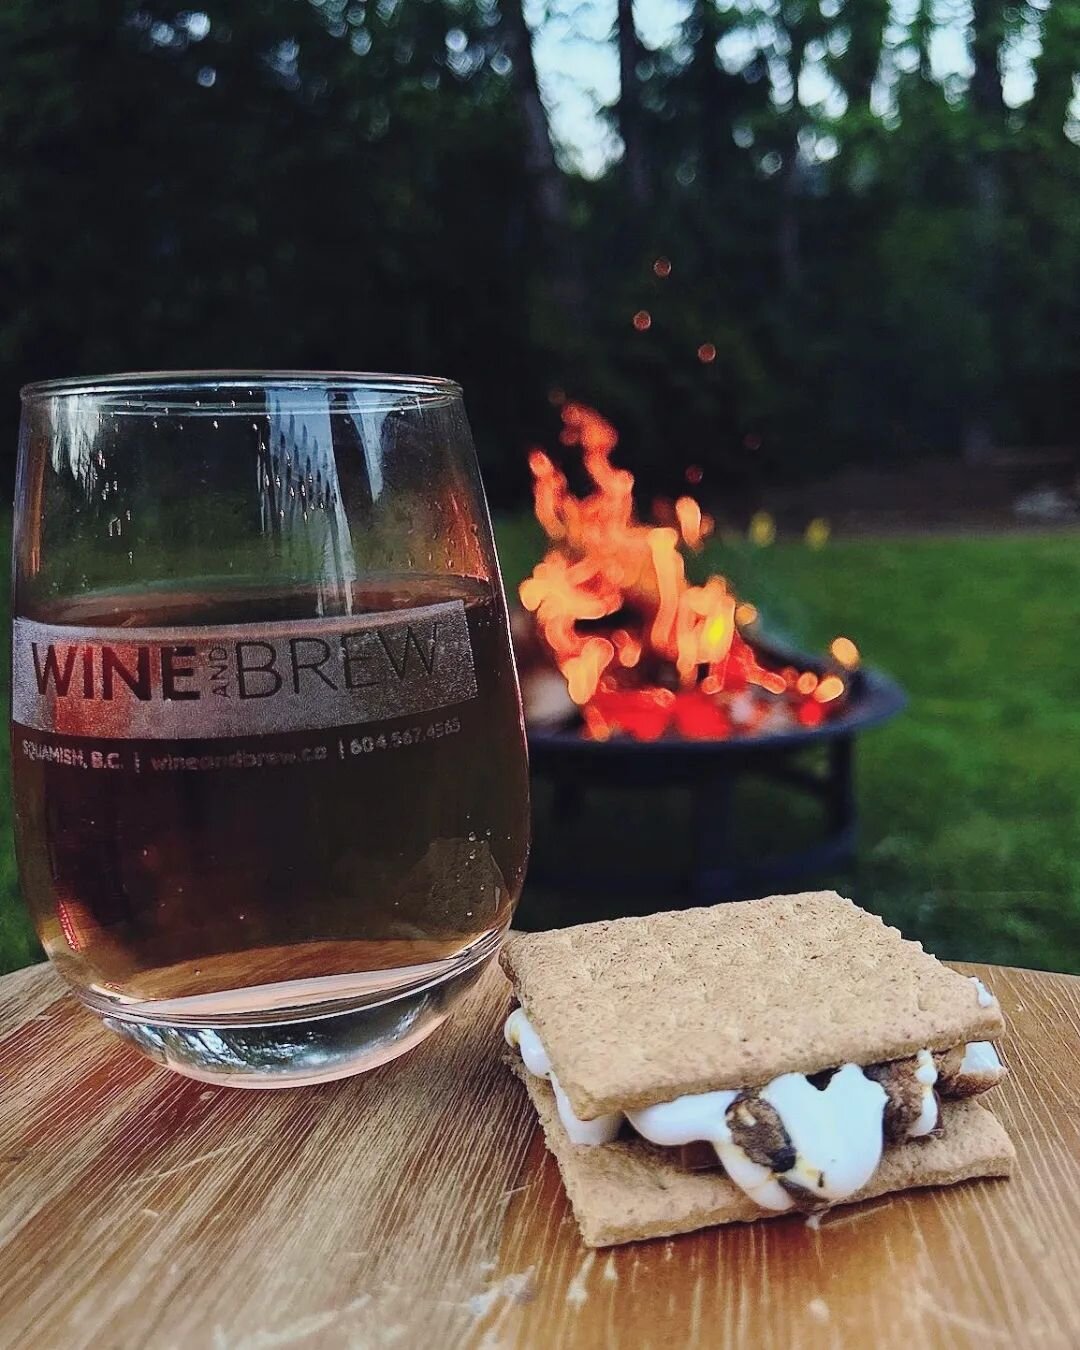 Have you started your summer wine yet? ☀️ 

It's a great time to stock up so you'll always have something tasty on hand for a spur of the moment backyard BBQ 🍹

#backyardgoals #campfire
#winelover #winetime #craftwine #winemaking #summervibes #squam